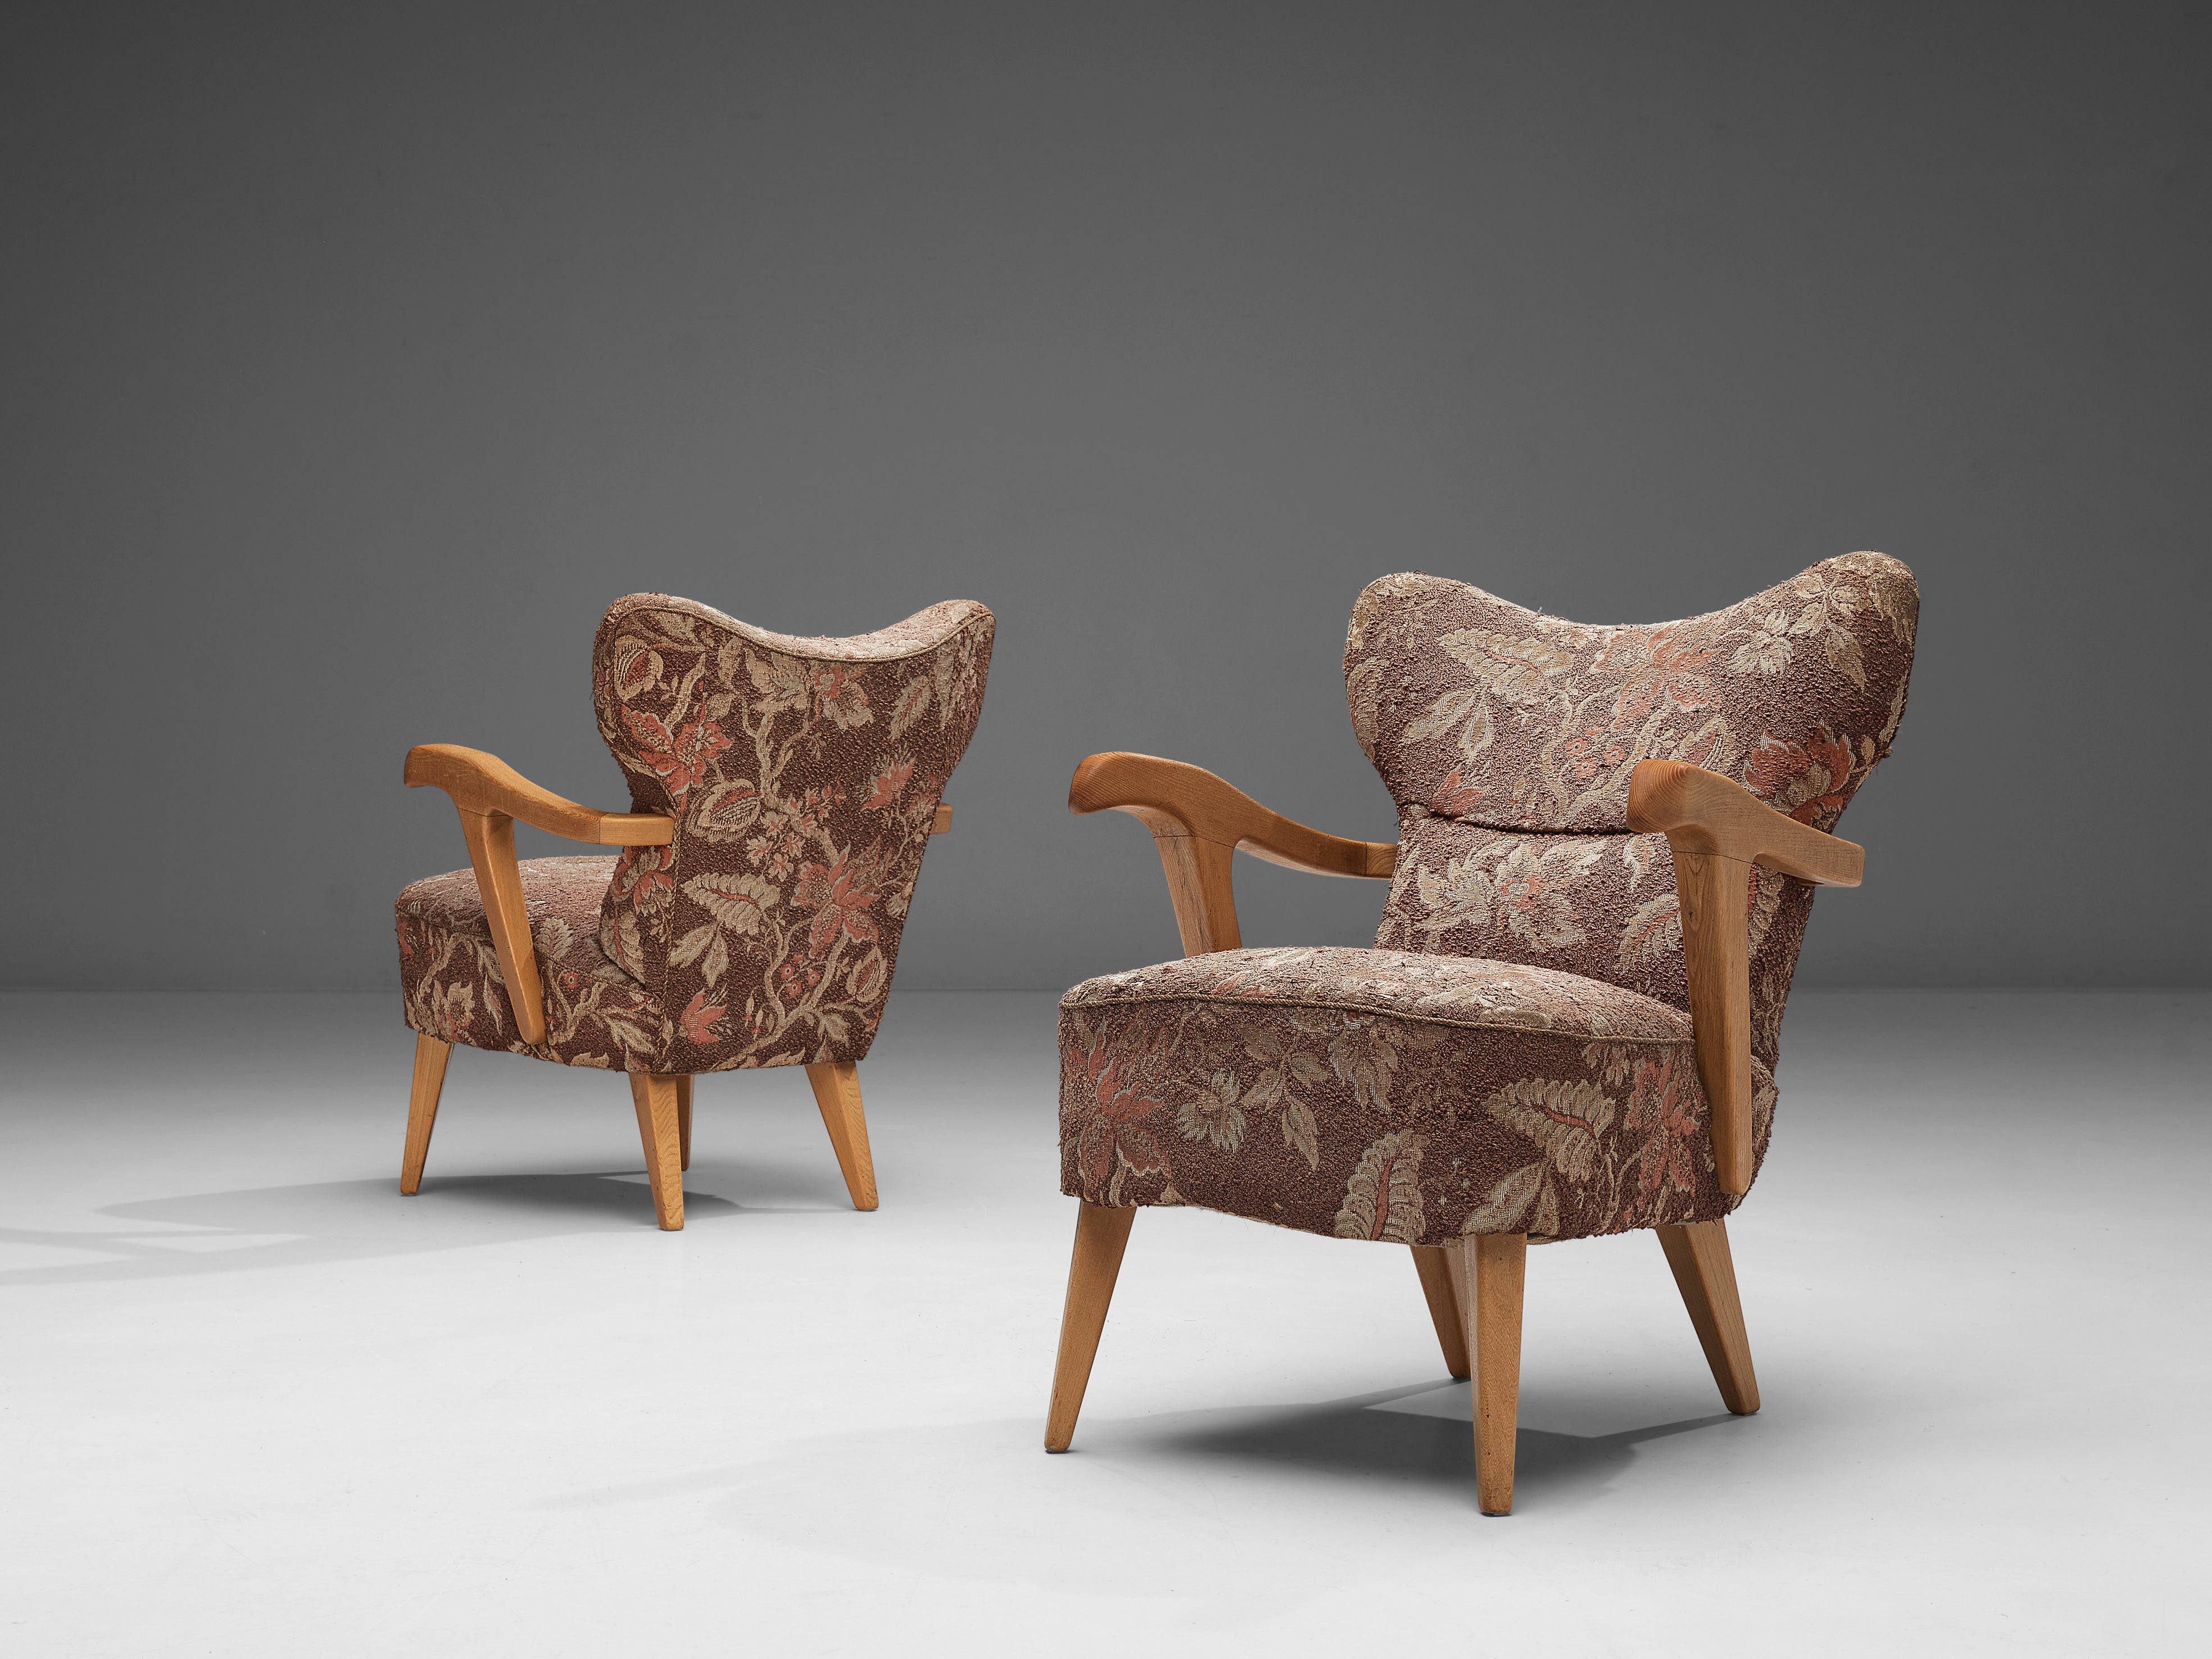 Pair of Sculptural Italian Lounge Chairs in Oak and Floral Upholstery